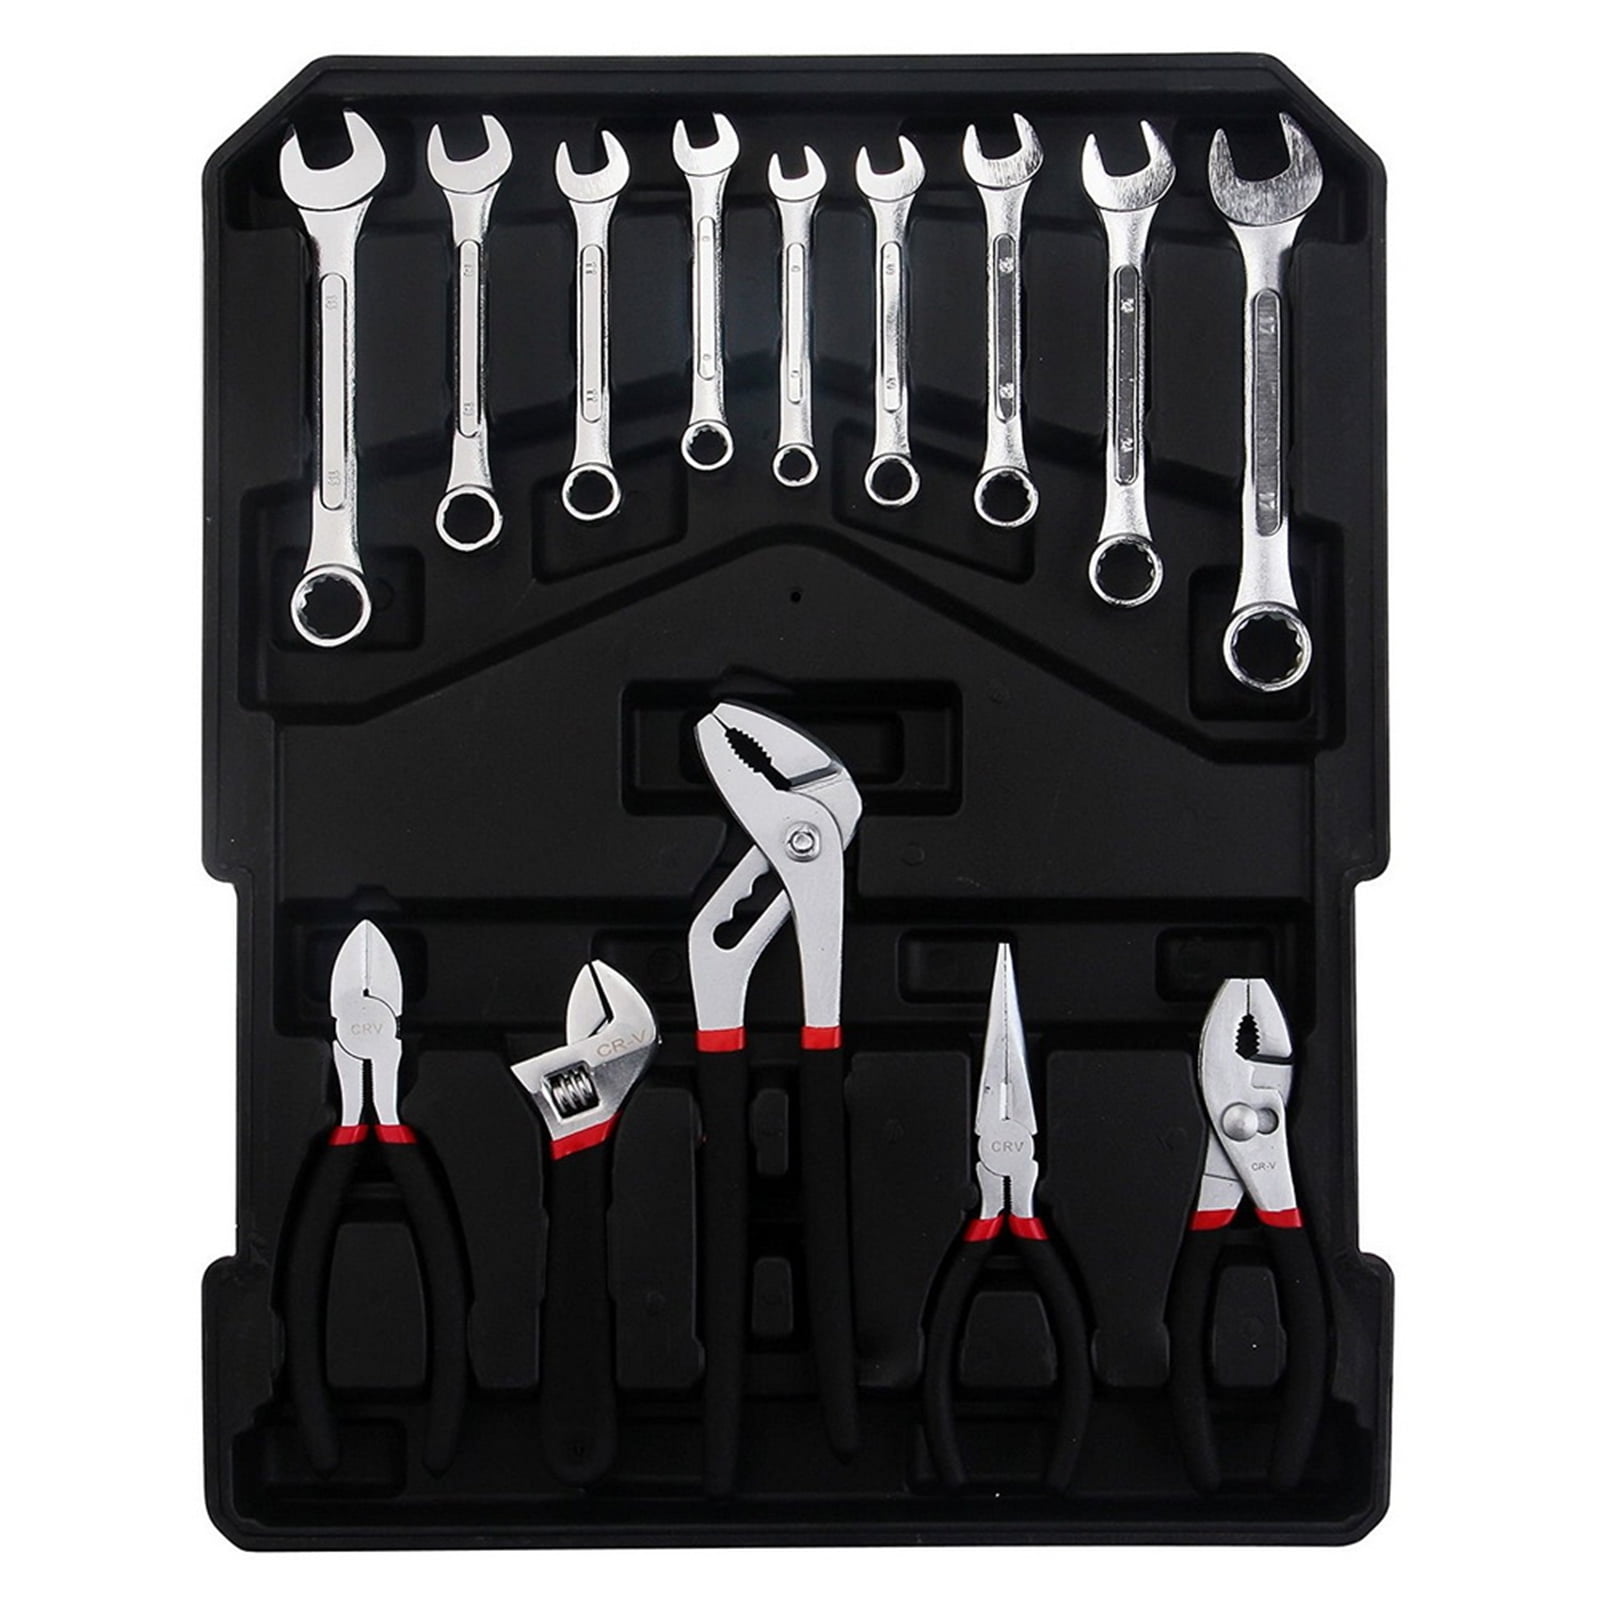 799 Pieces Aluminum Trolley Case Tool Set, Household Tool Set Home 